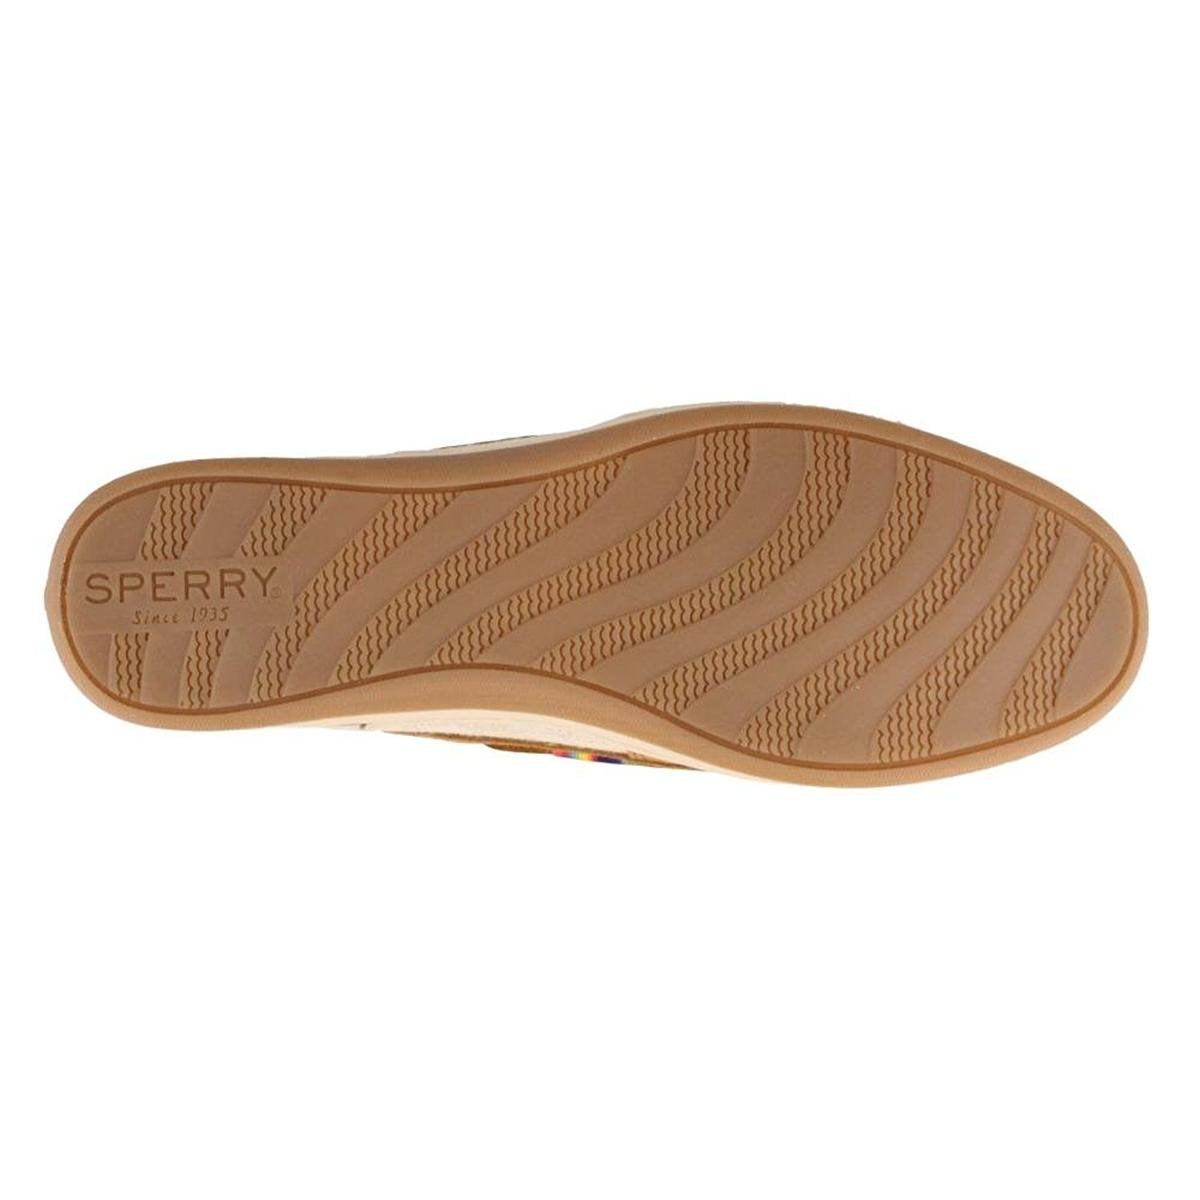 FIREFISH LEATHER RAINBOW TAN | Sperry Top-Sider Firefish Womens Rainbow Tan Sneakers Made in USA